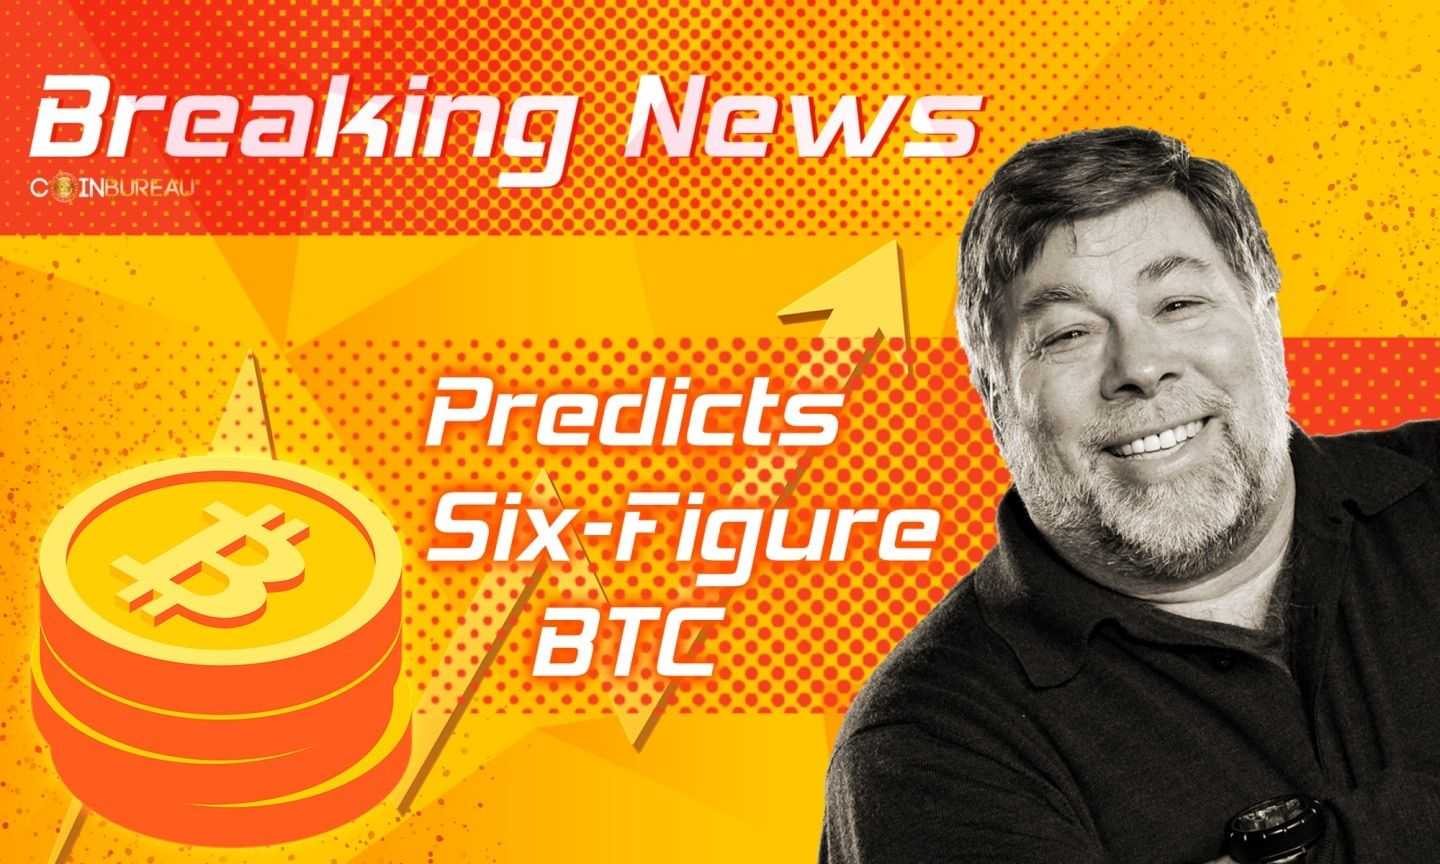 Apple's Steve Wozniak Predicts $100,000 Bitcoin, Turns Out to Be Early BTC Investor